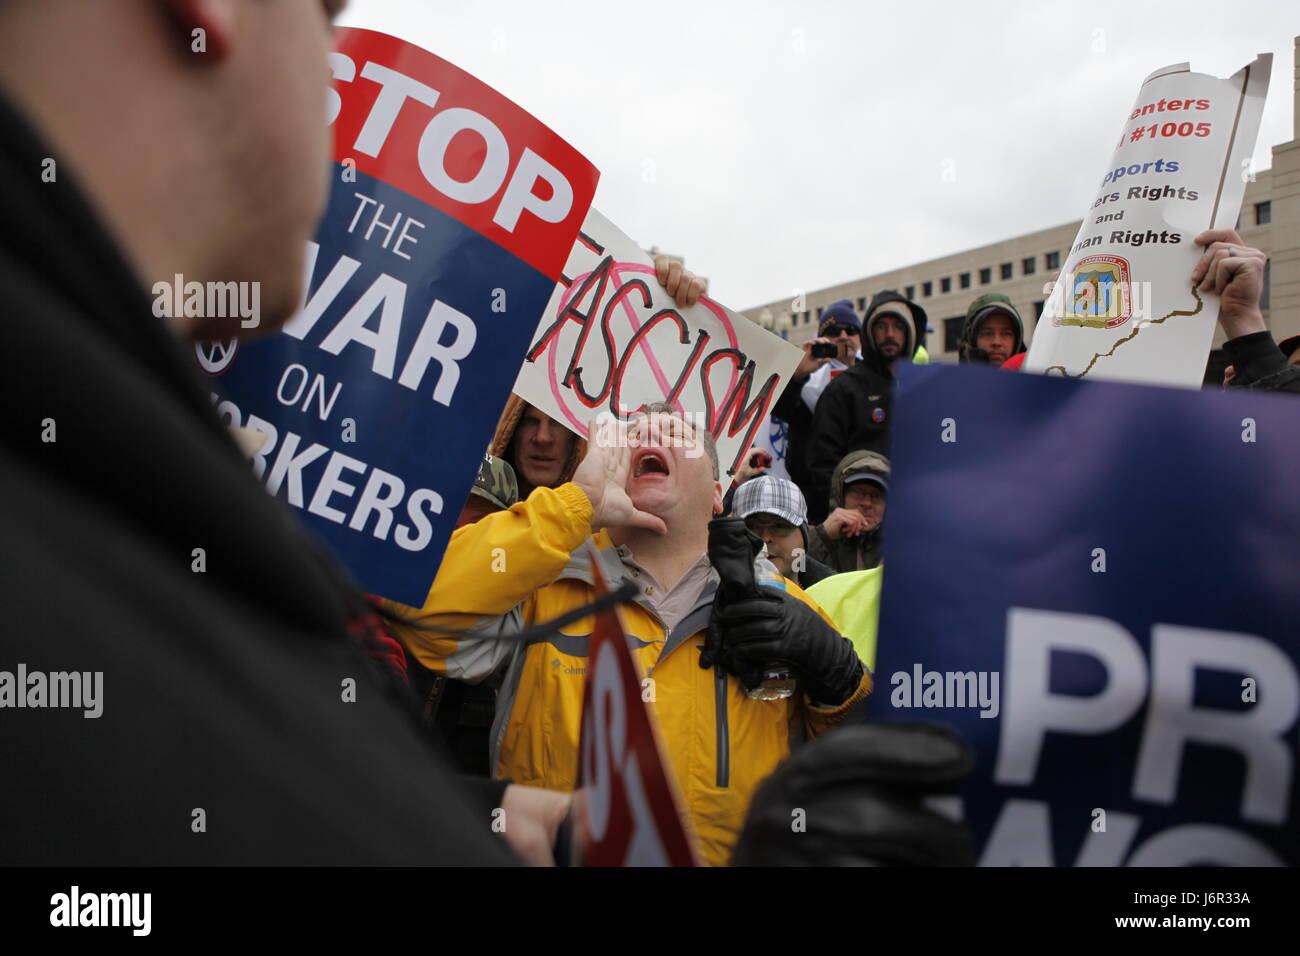 An anti-union agitator, center, who would only gave his name as Ron and who said he is from Carmel, Ind., is surrounded by angry union members as he shouts anti-union slogans during a rally attended by thousands of Union supporters and members at the Indiana Statehouse. Stock Photo